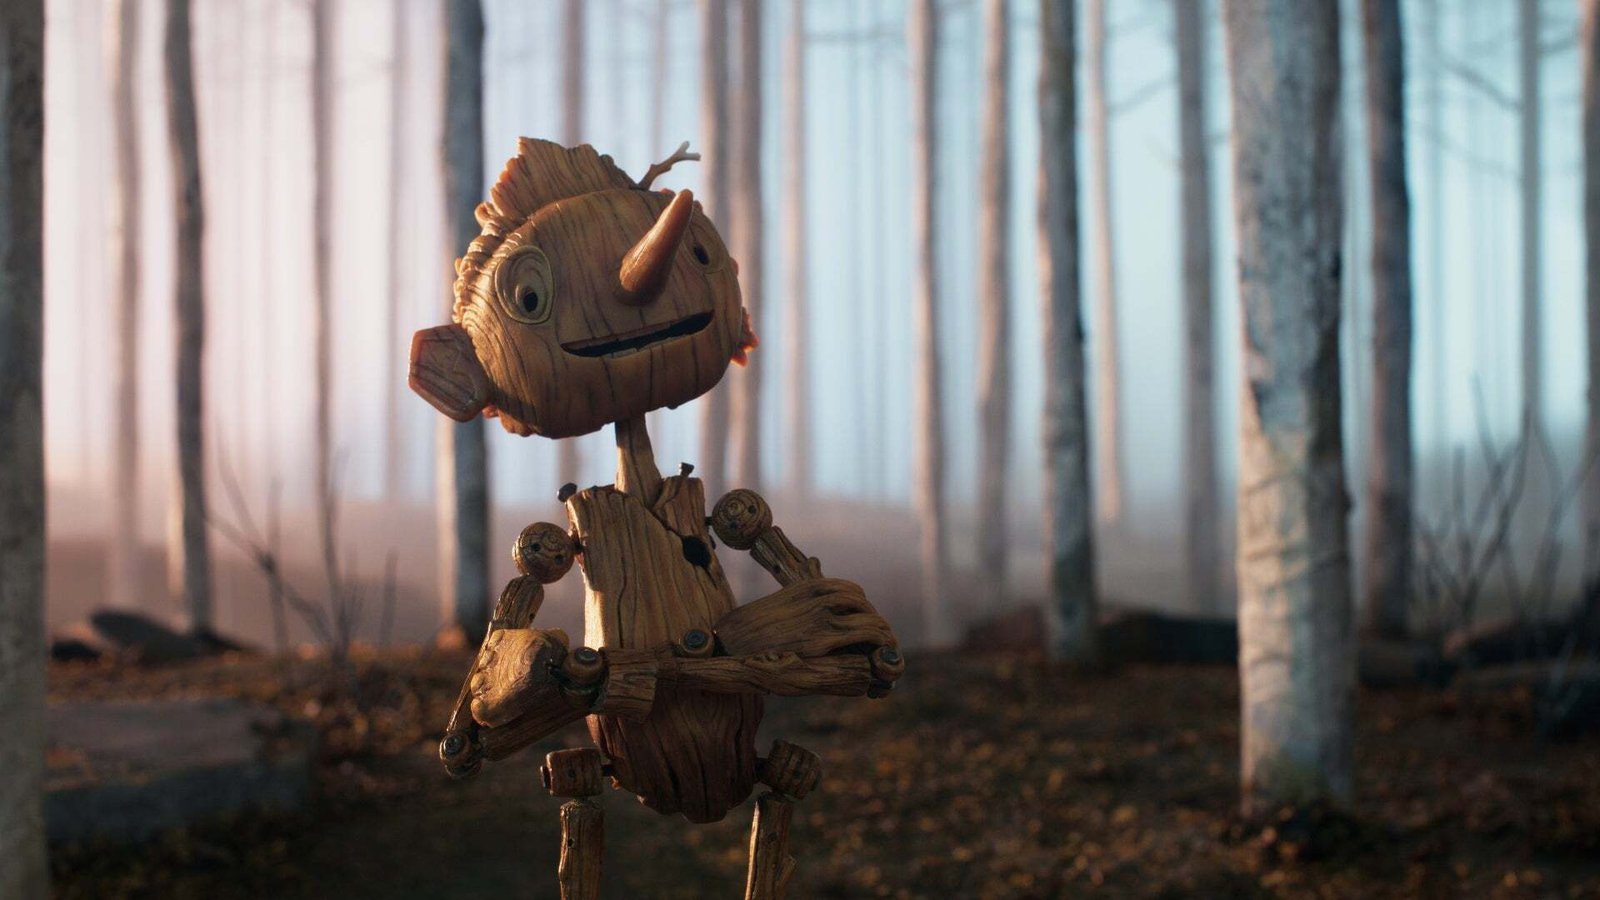 Guillermo del Toro to direct 'Pinocchio' project for Netflix, News